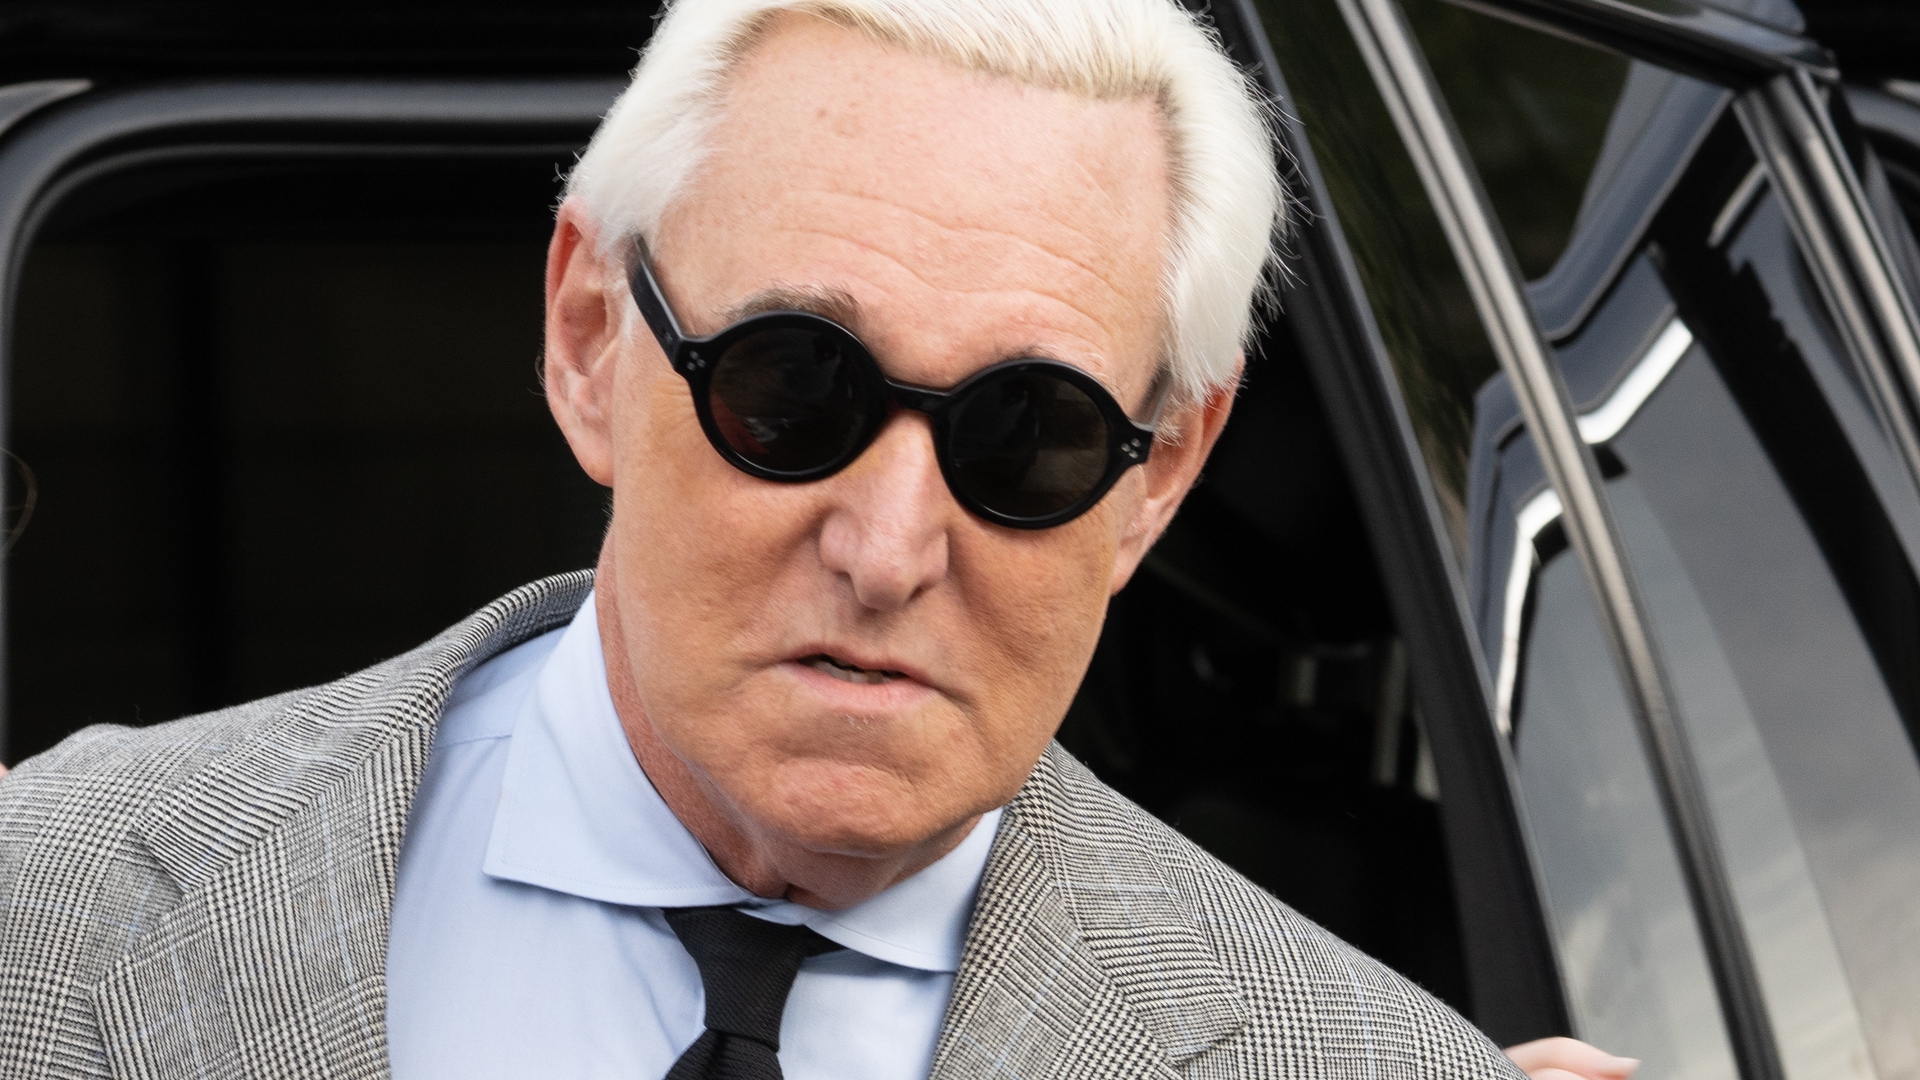 Roger Stone, day 3 of trial